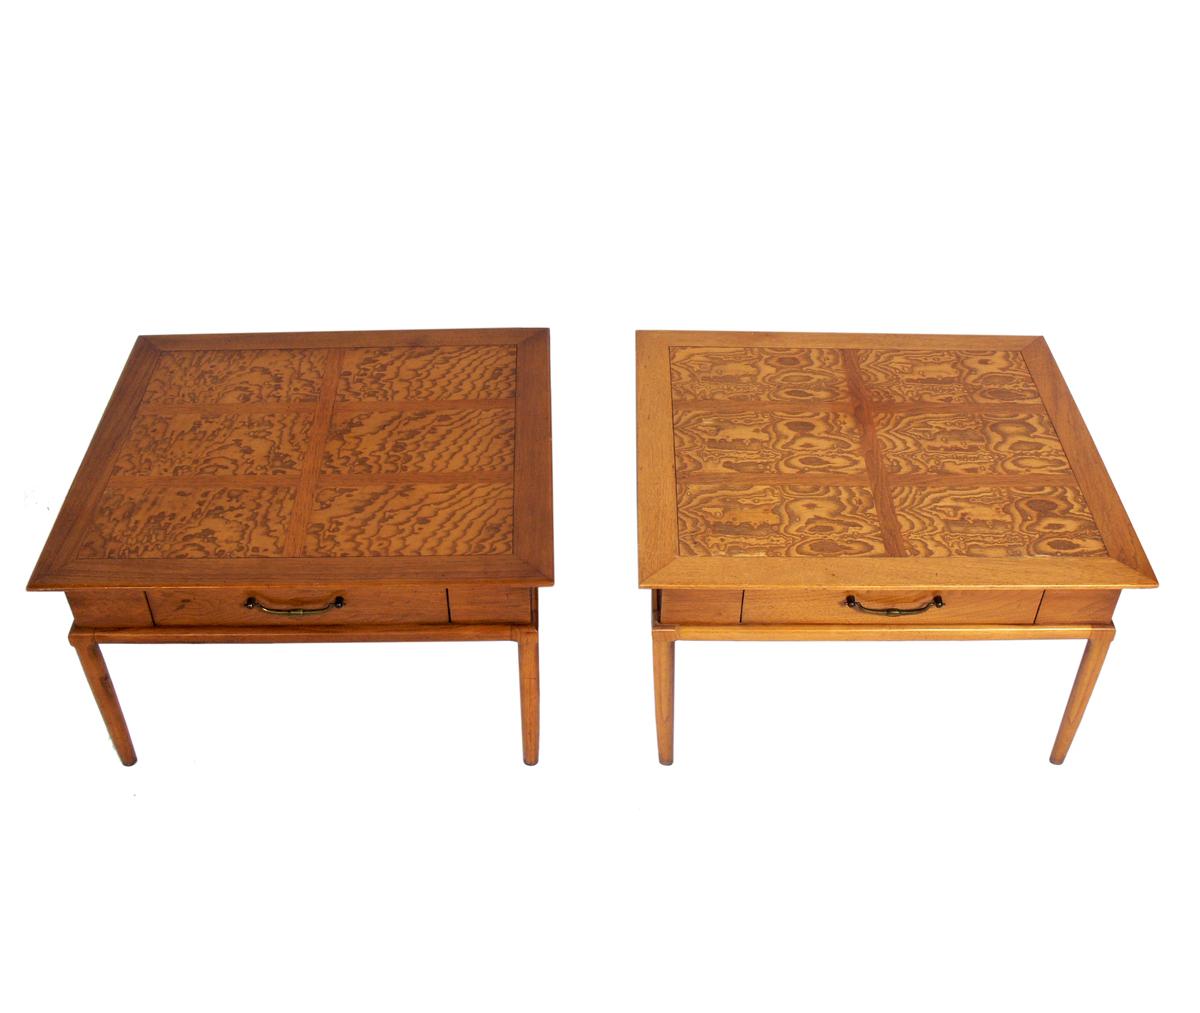 Pair of Large Scale End Tables, designed by John Lubberts and Lambert Mulder for Tomlinson, American, circa 1950s. Designed for Tomlinson's 